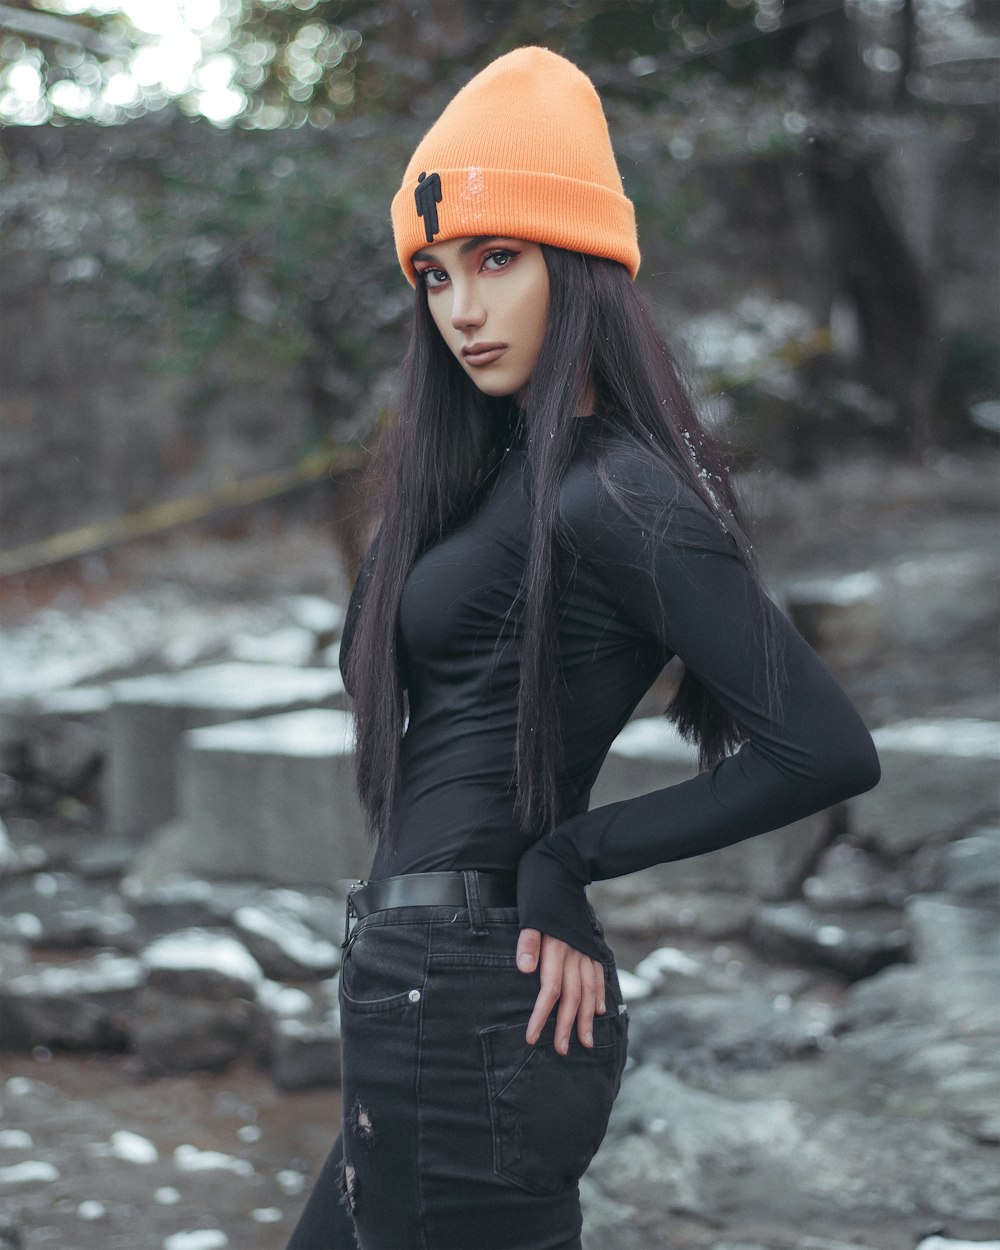 a woman in a black top and orange hat